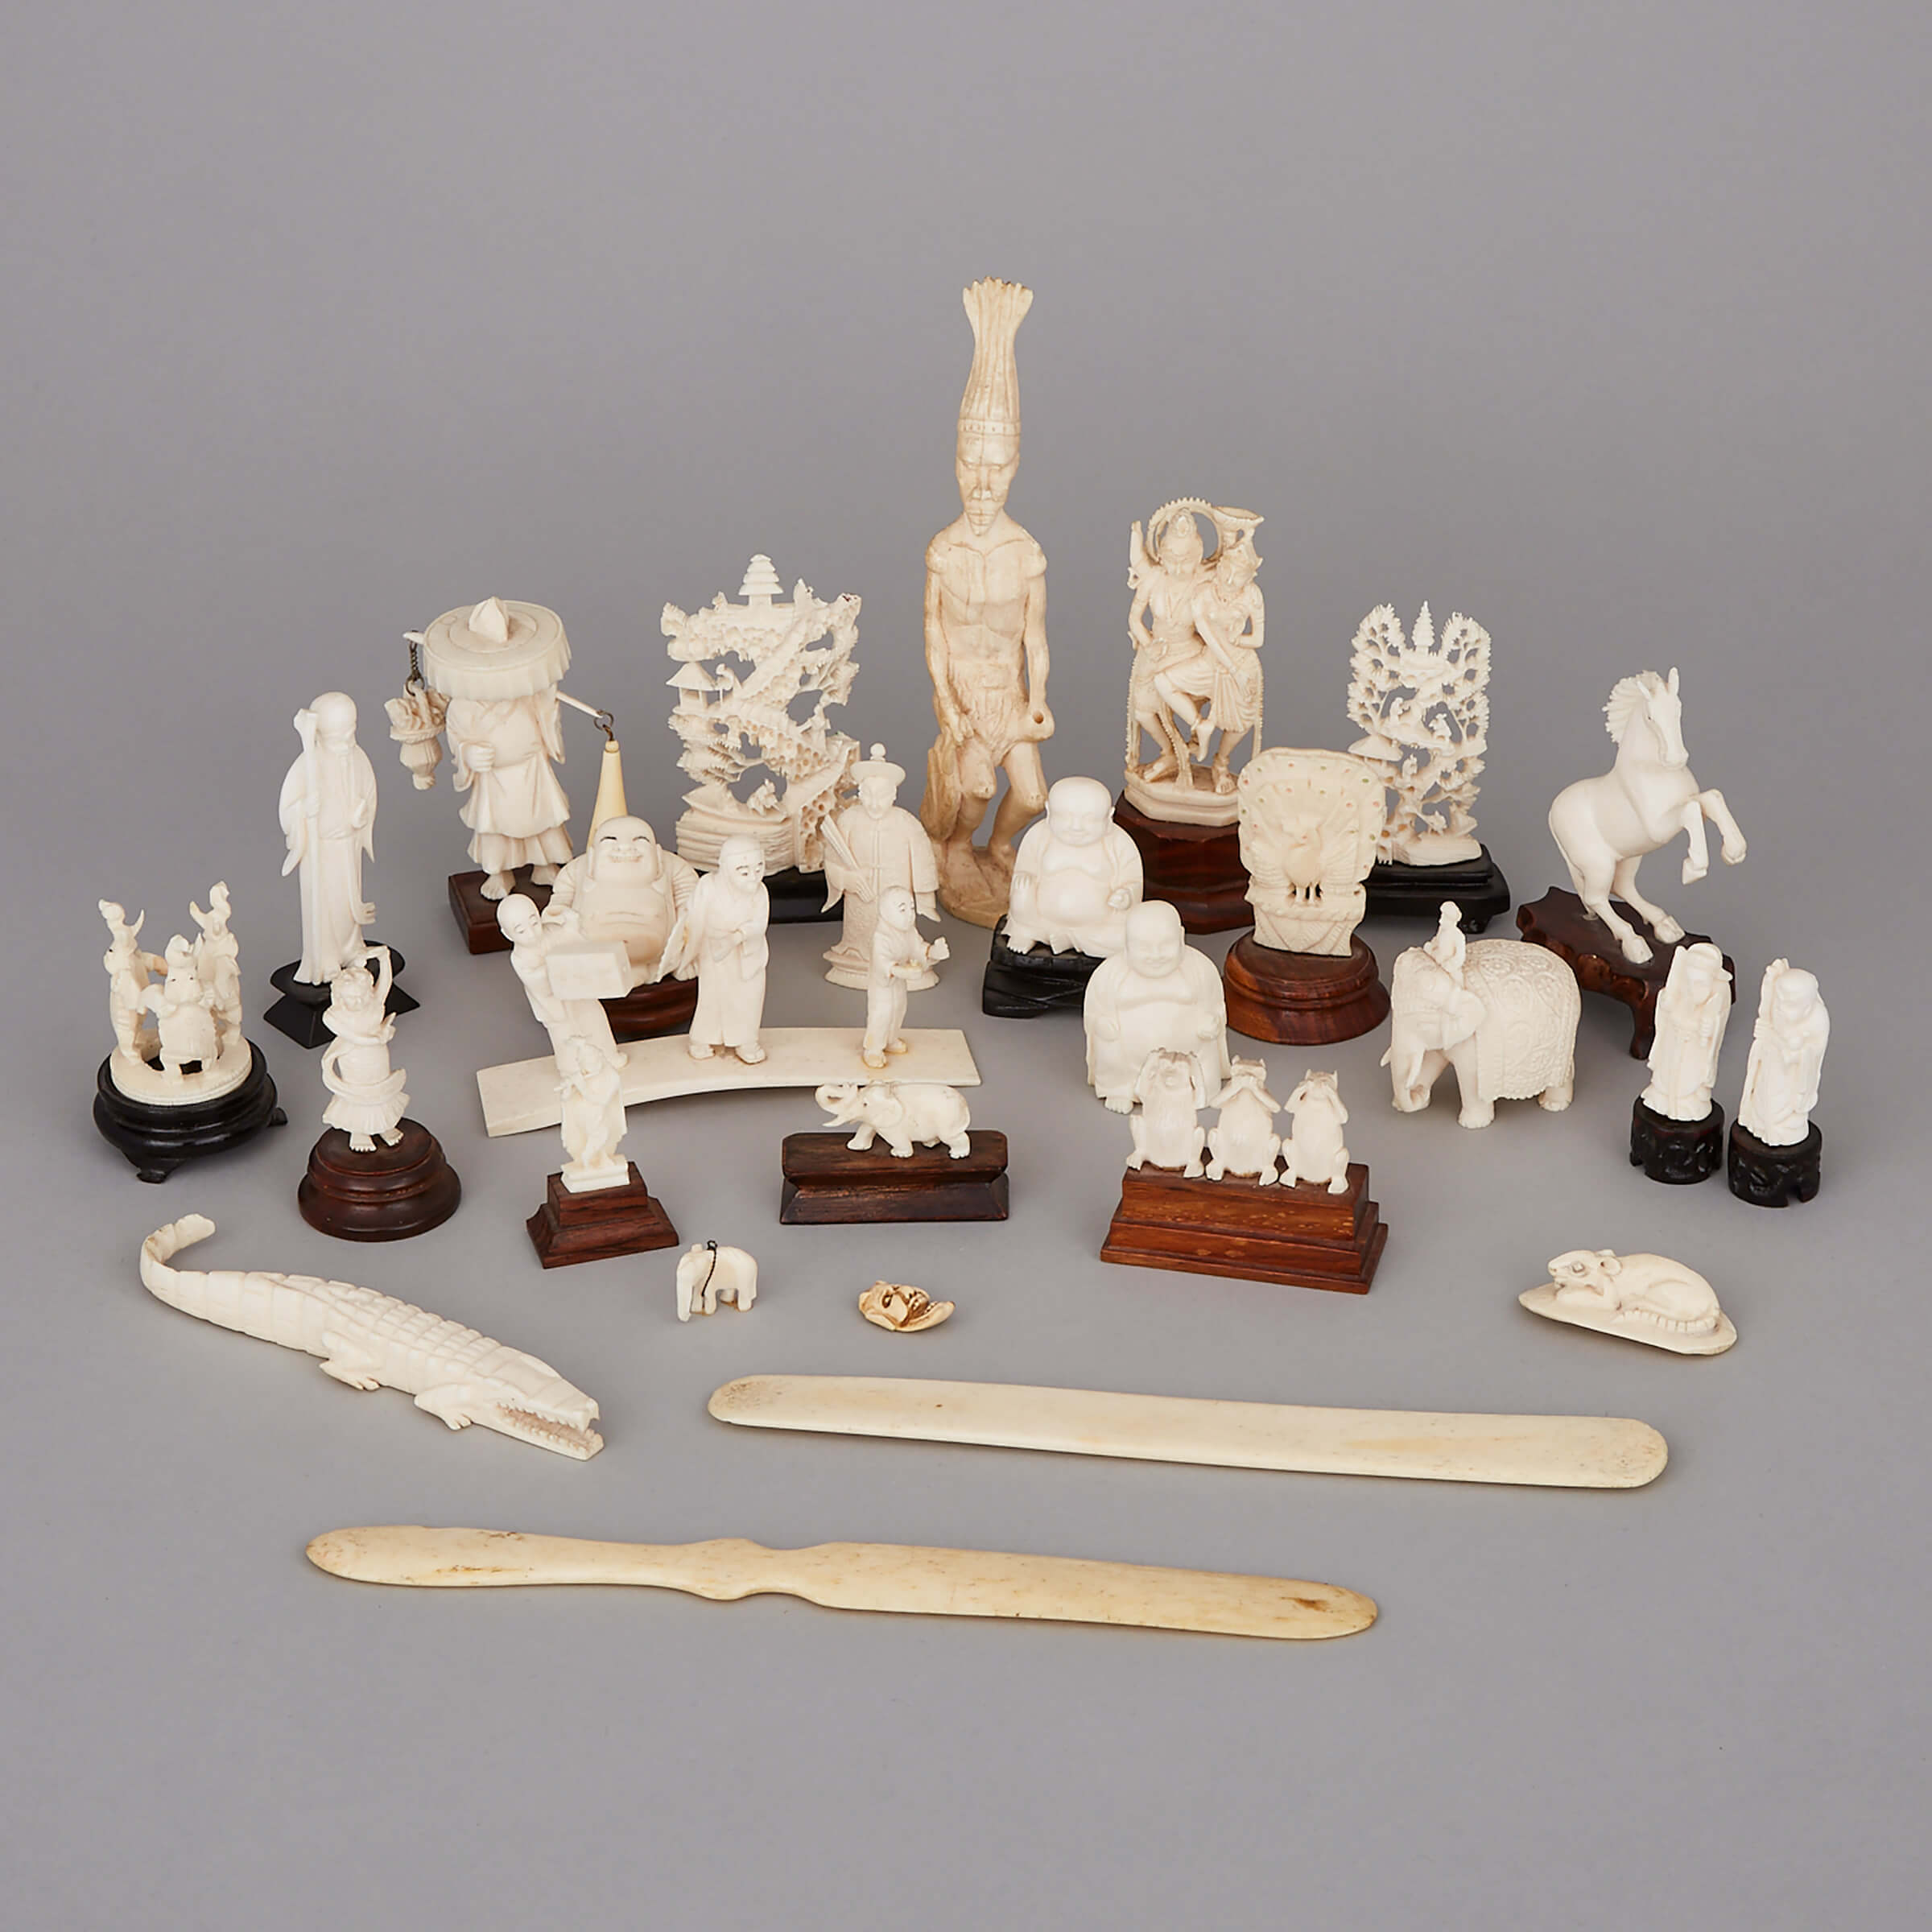 A Group of Twenty-Seven Ivory and Bone Carved Pieces